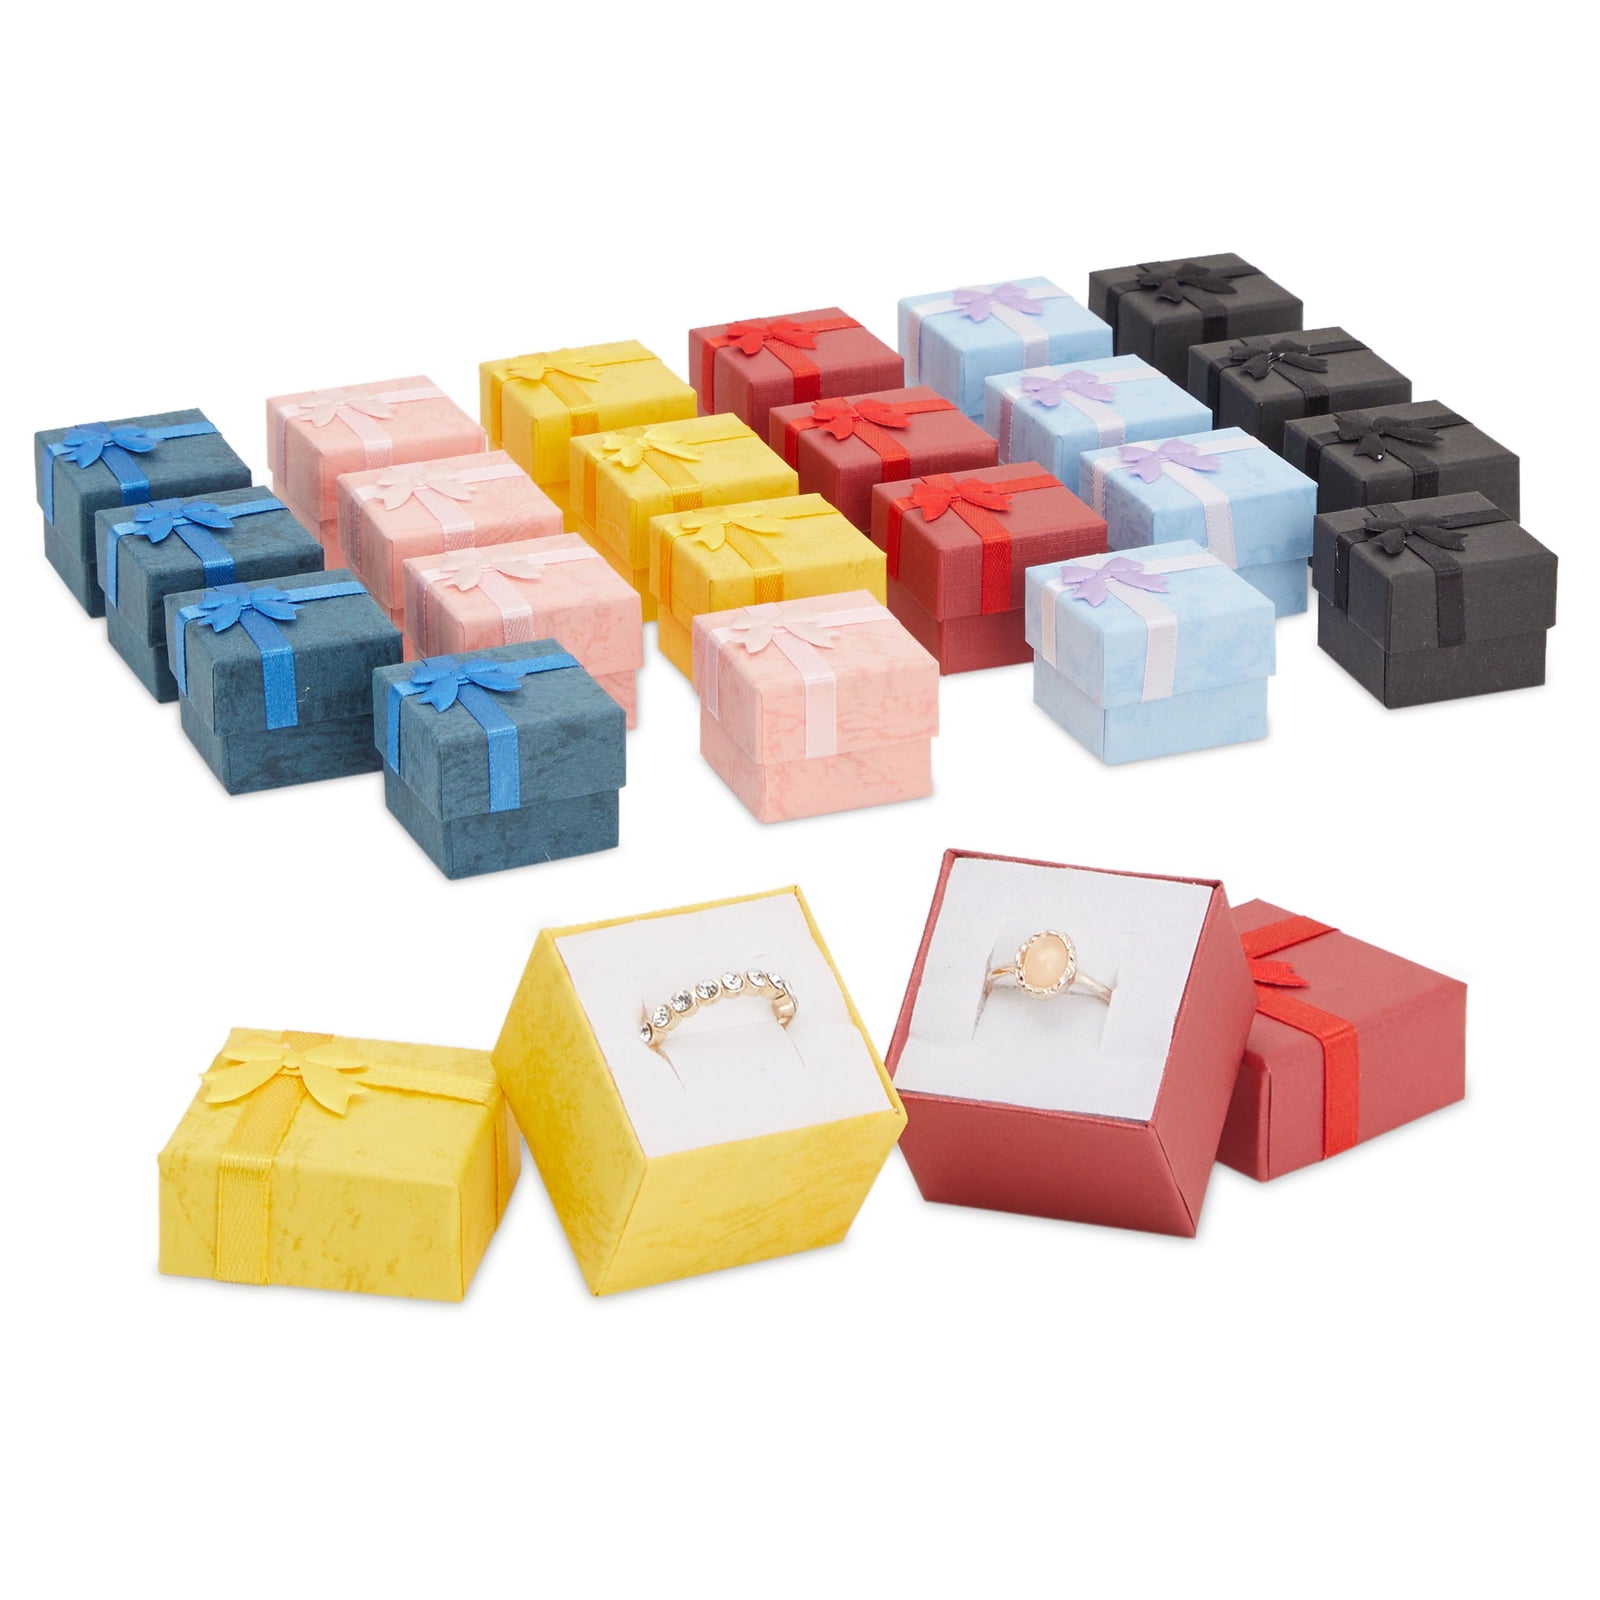 New 12 White Leatherette Jewelry Gift Boxes 2.5" Box 